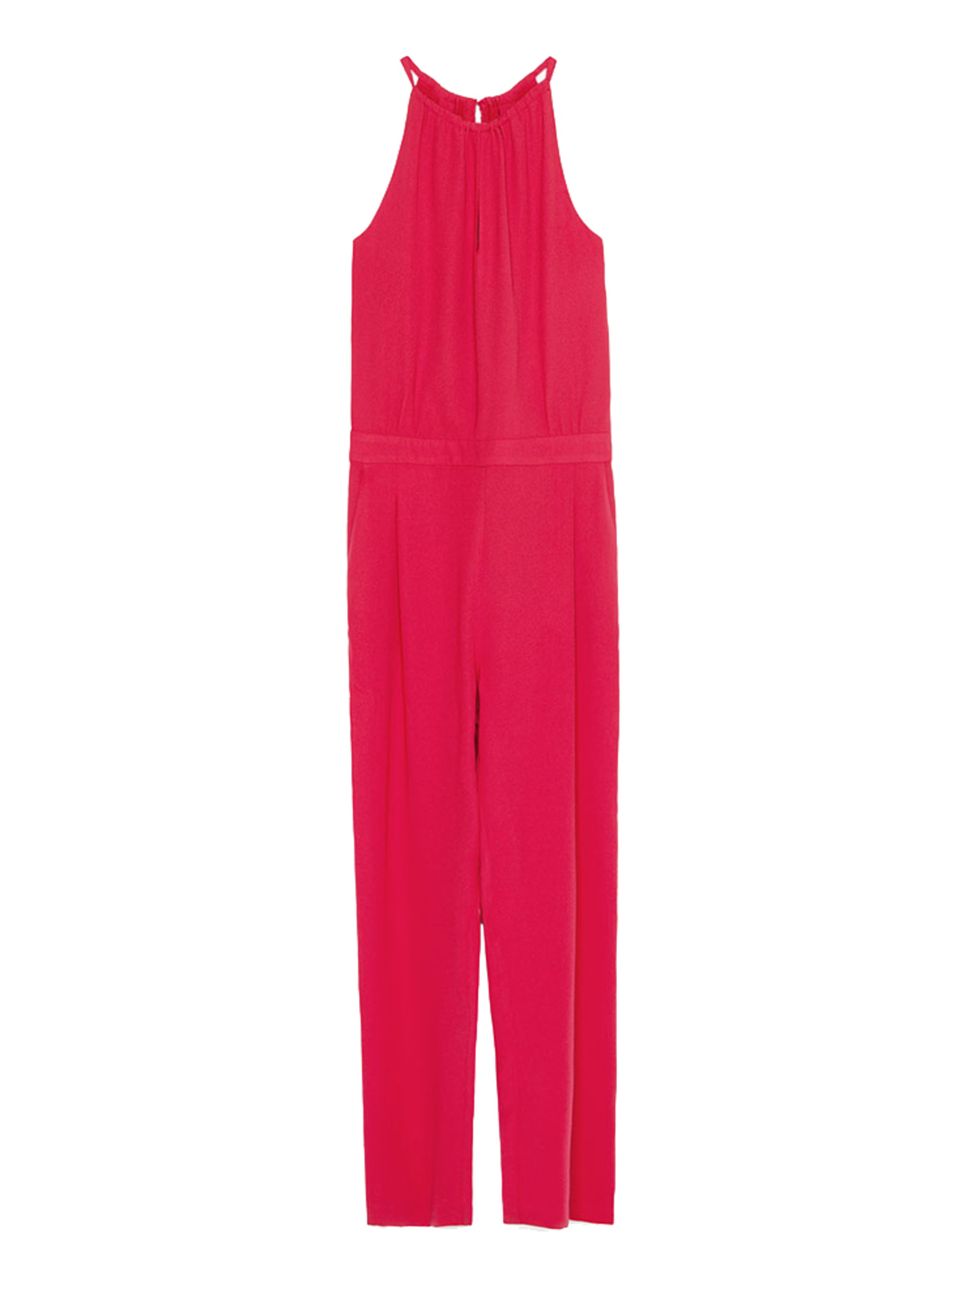 <p><a href="http://www.zara.com/uk/en/collection-aw15/woman/jumpsuits/long-jumpsuit-with-spaghetti-straps-c663016p2775988.html" target="_blank">Zara</a> jumpsuit, £49.99</p>